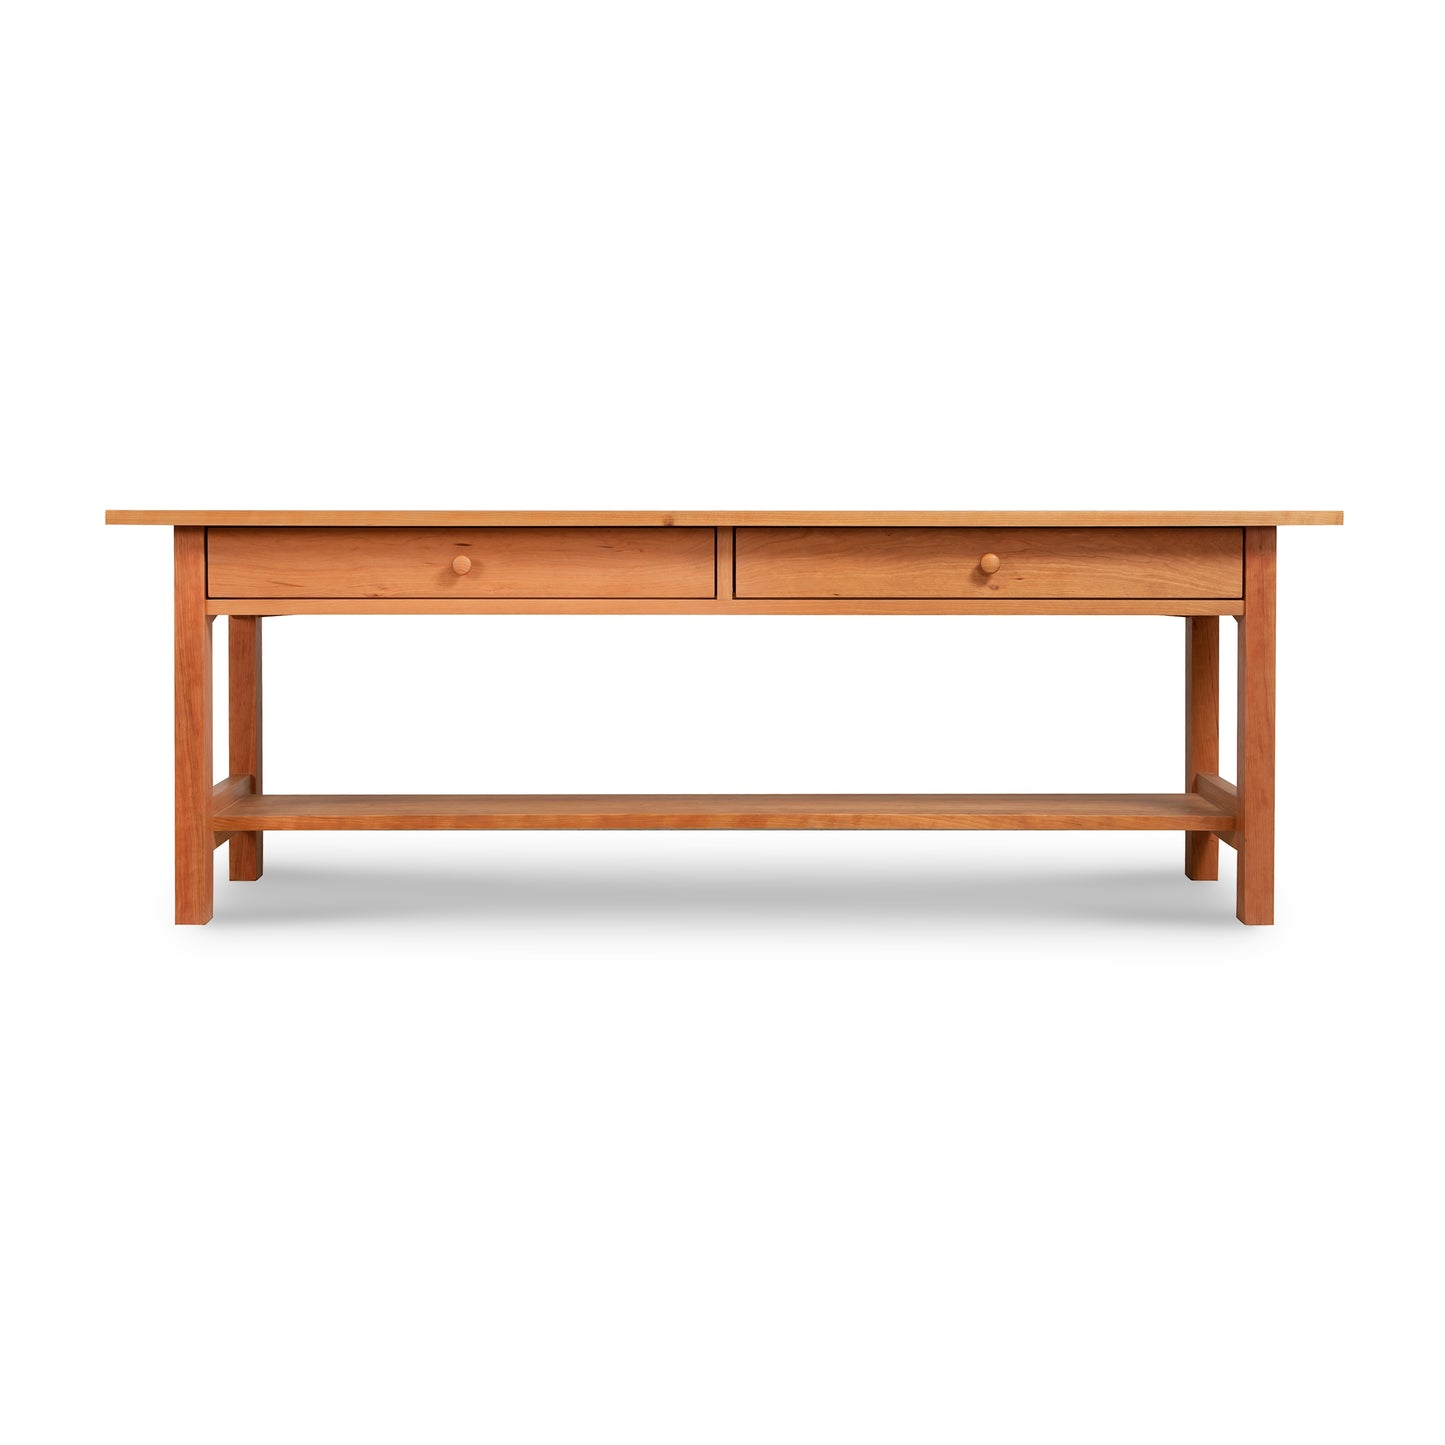 The Vermont Furniture Designs Burlington Shaker 2-Drawer Coffee Table, a low console, features two convenient drawers for storage.